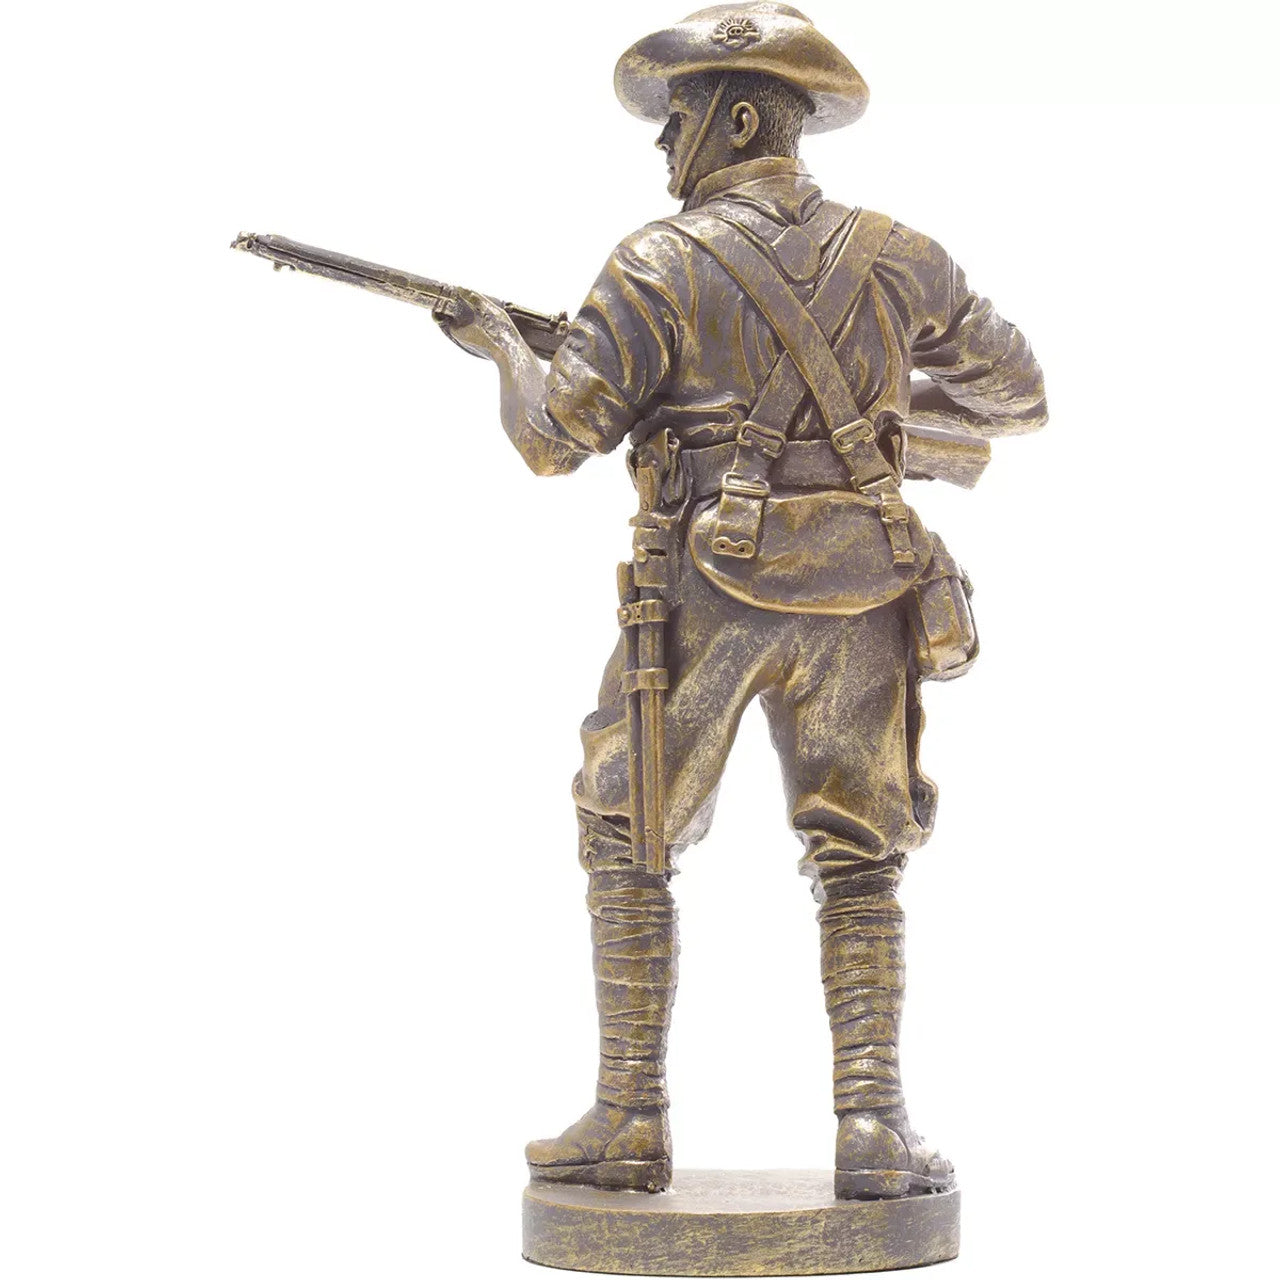 The sensational collector's edition of our fantastic WW1 Digger Miniature figurine. Only 100 of the WW1 Digger Miniature figurines feature this unique gold finish, creating the Collector's Gold Edition. www.defenceqstore.com.au